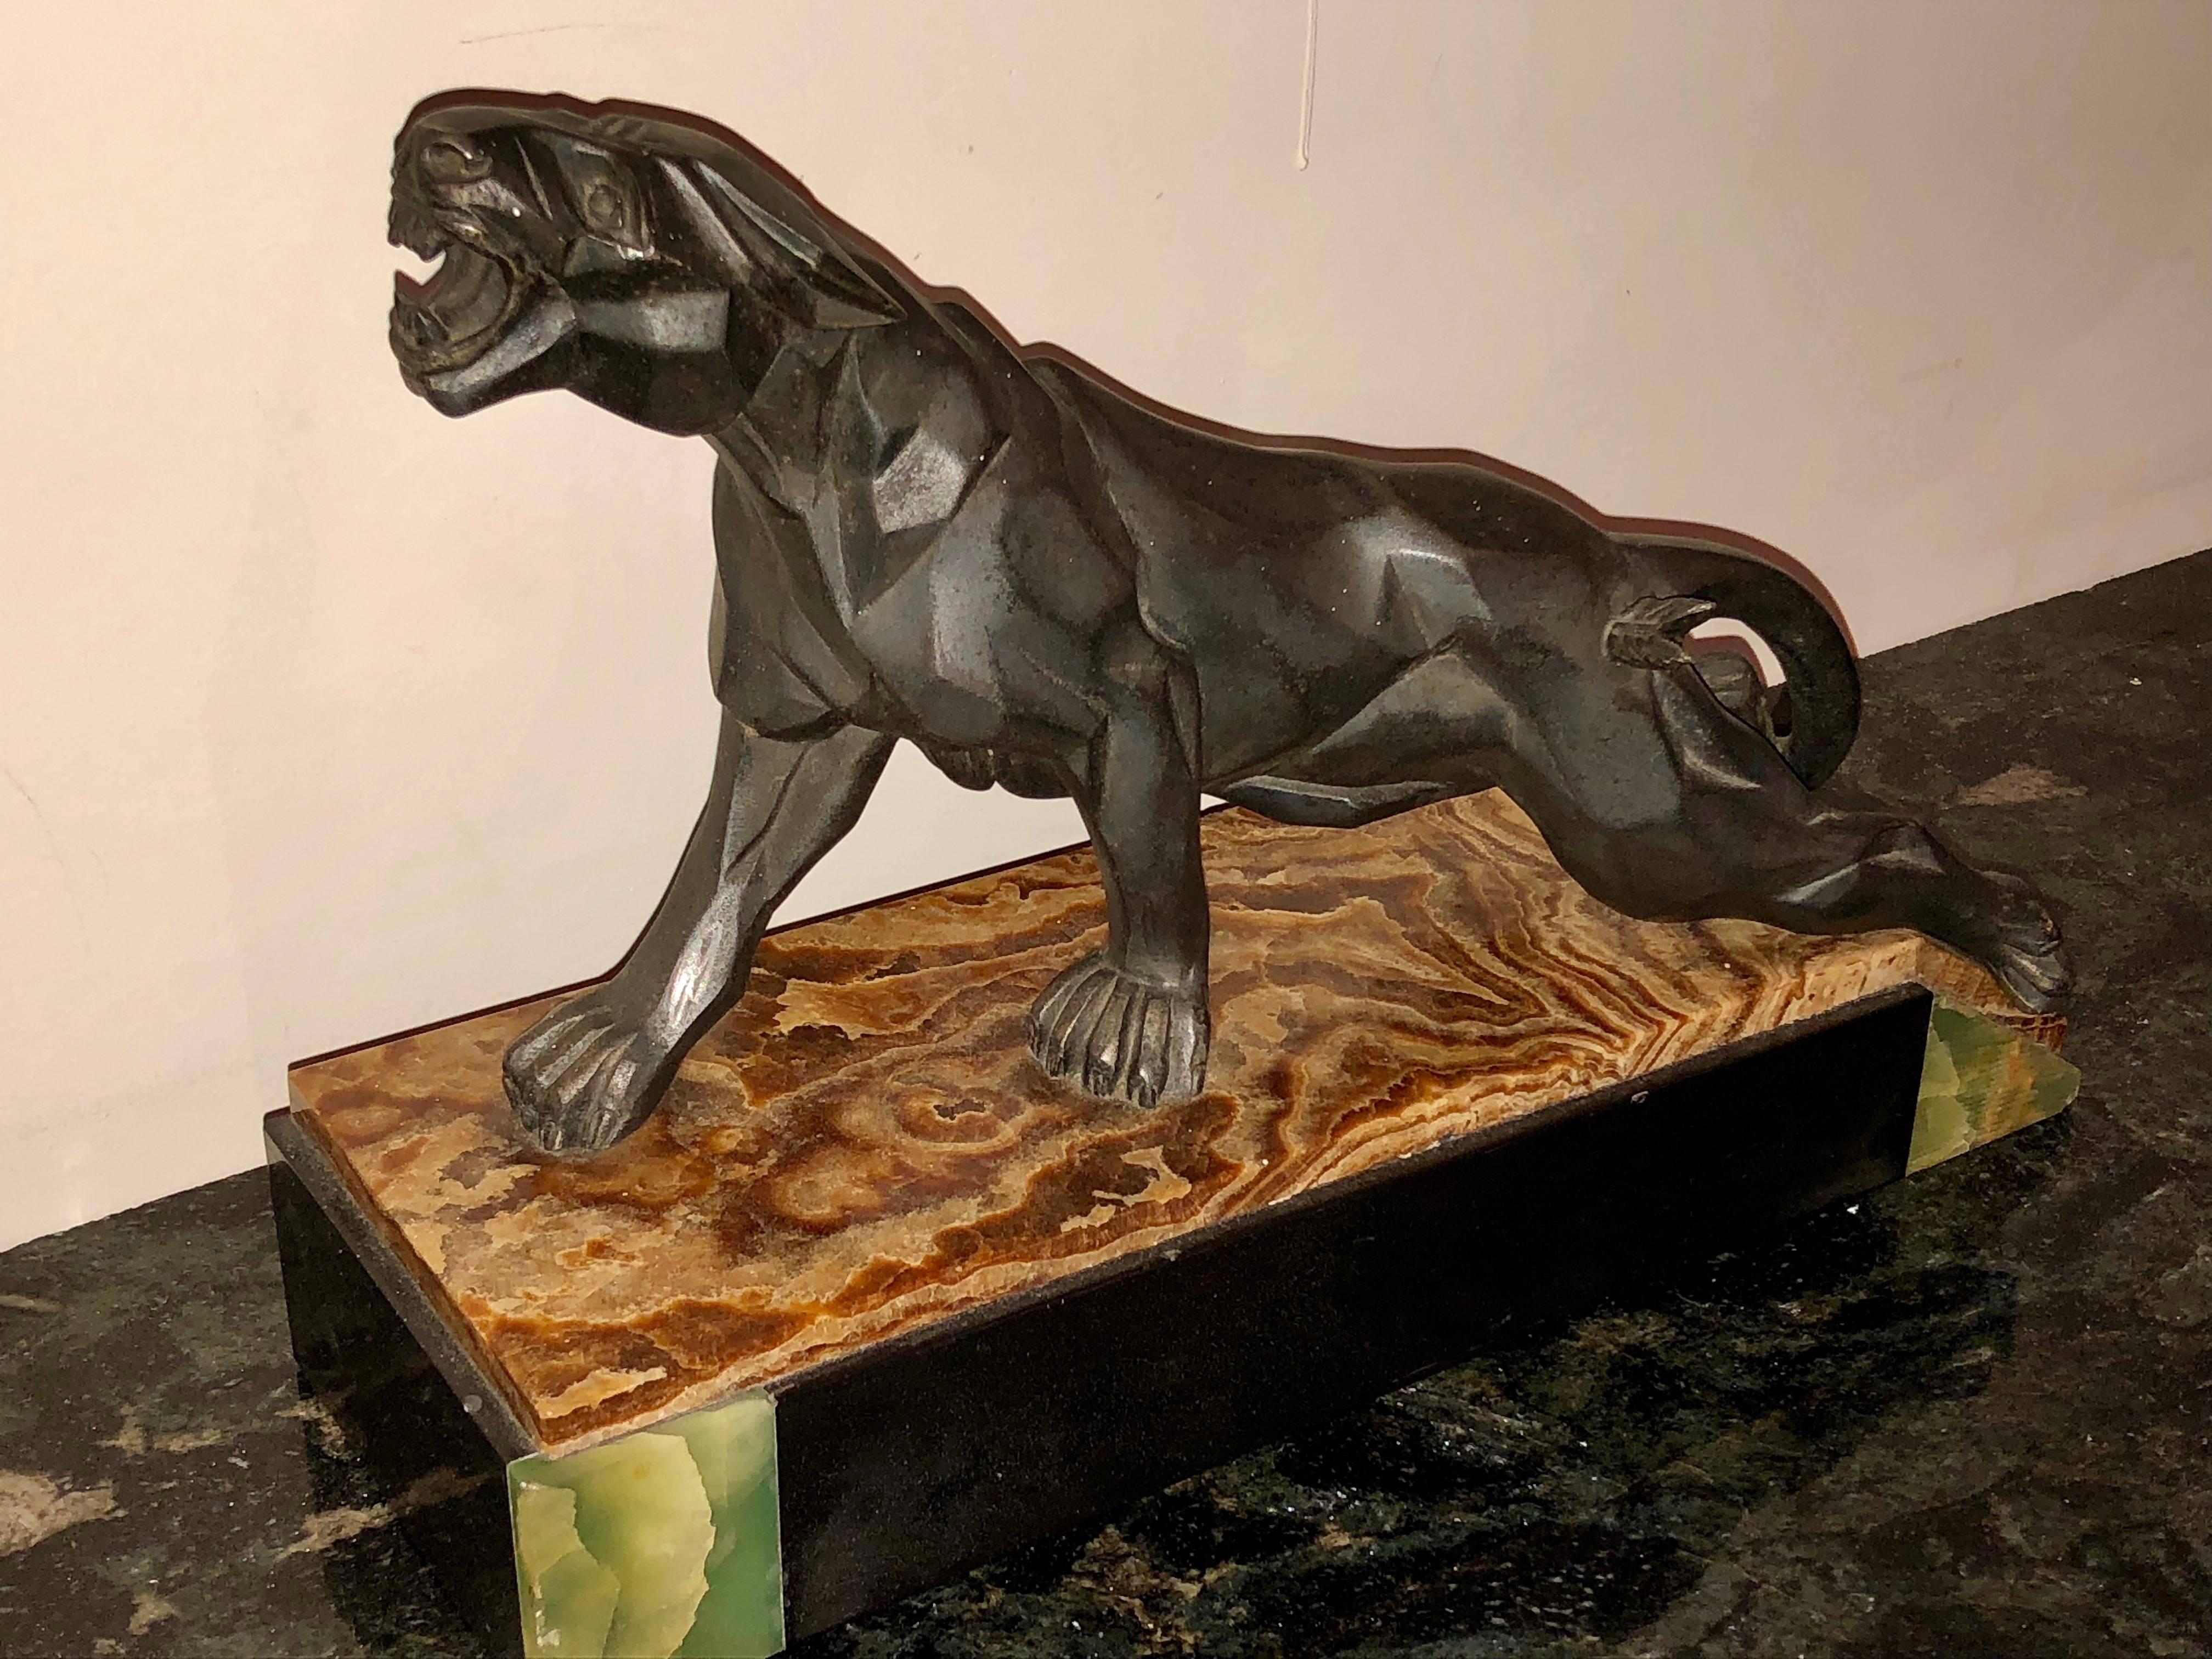 1930s Cubist sculpture of a climbing and growling panther on the prowl. Art Deco design with the artistic facet-like details are imaginative and convey a sense a strength, power and ferocity. This bold sculpture is in excellent original condition.